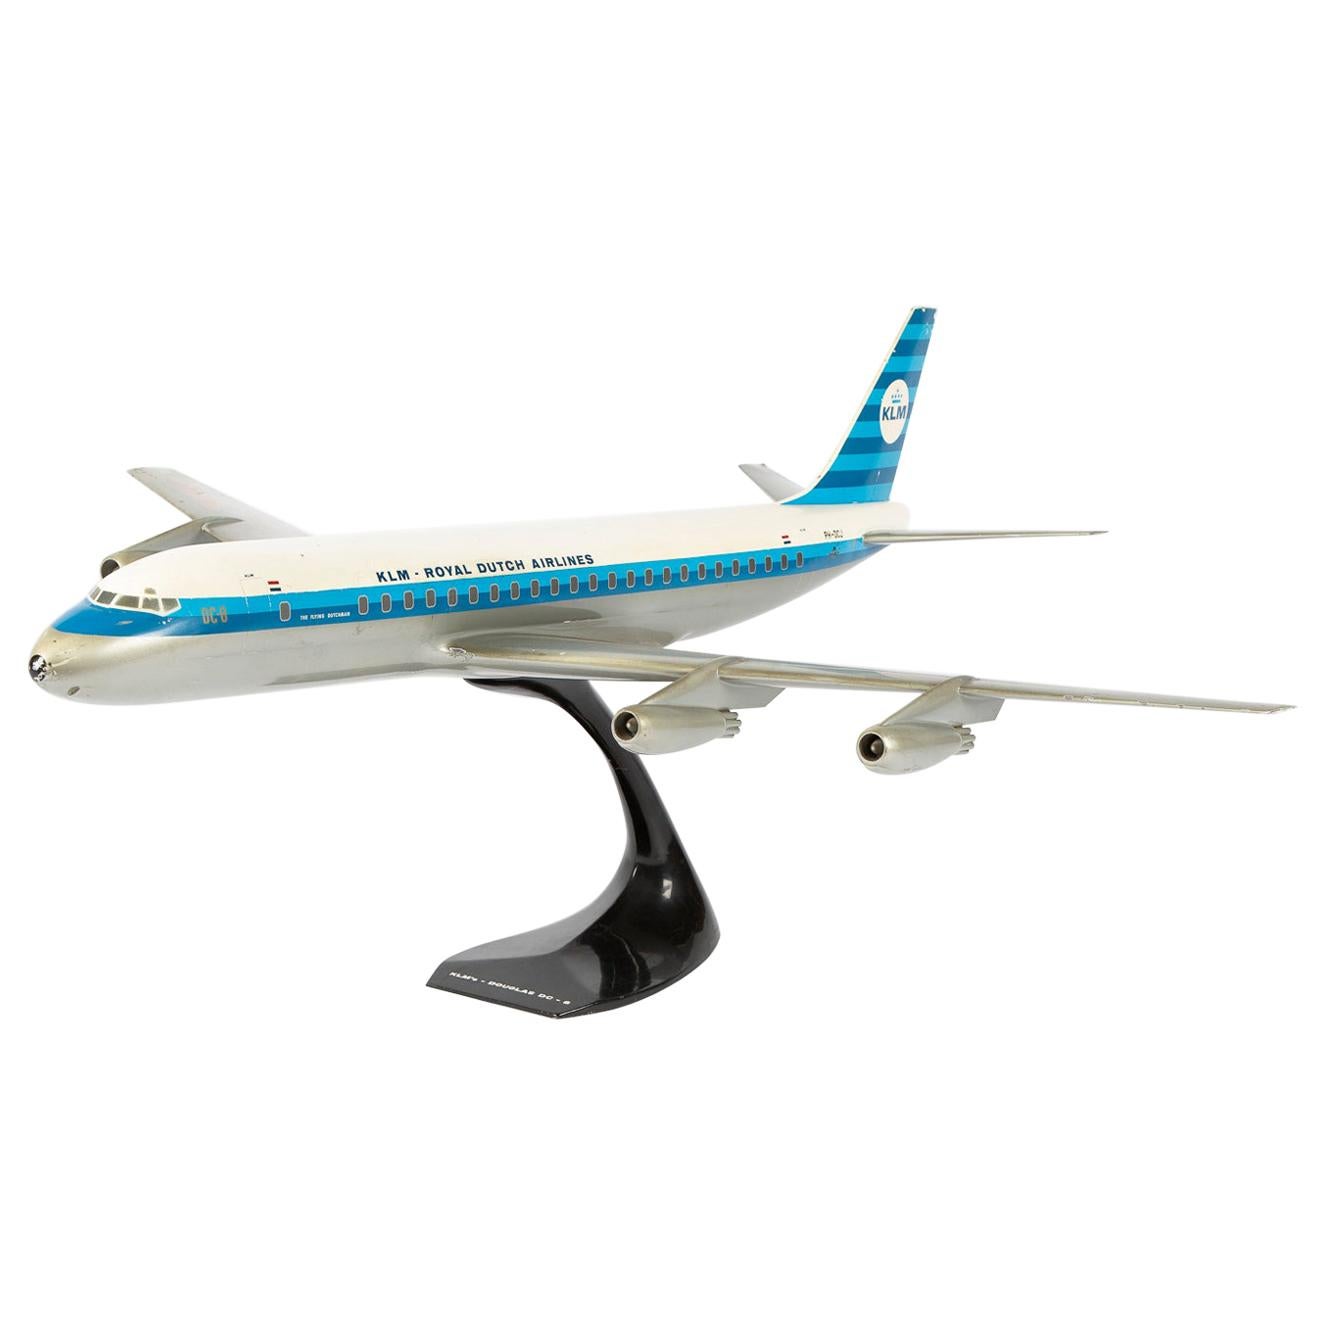 Scale Model of the KLM DC-8 Know as the The Flying Dutchman For Sale